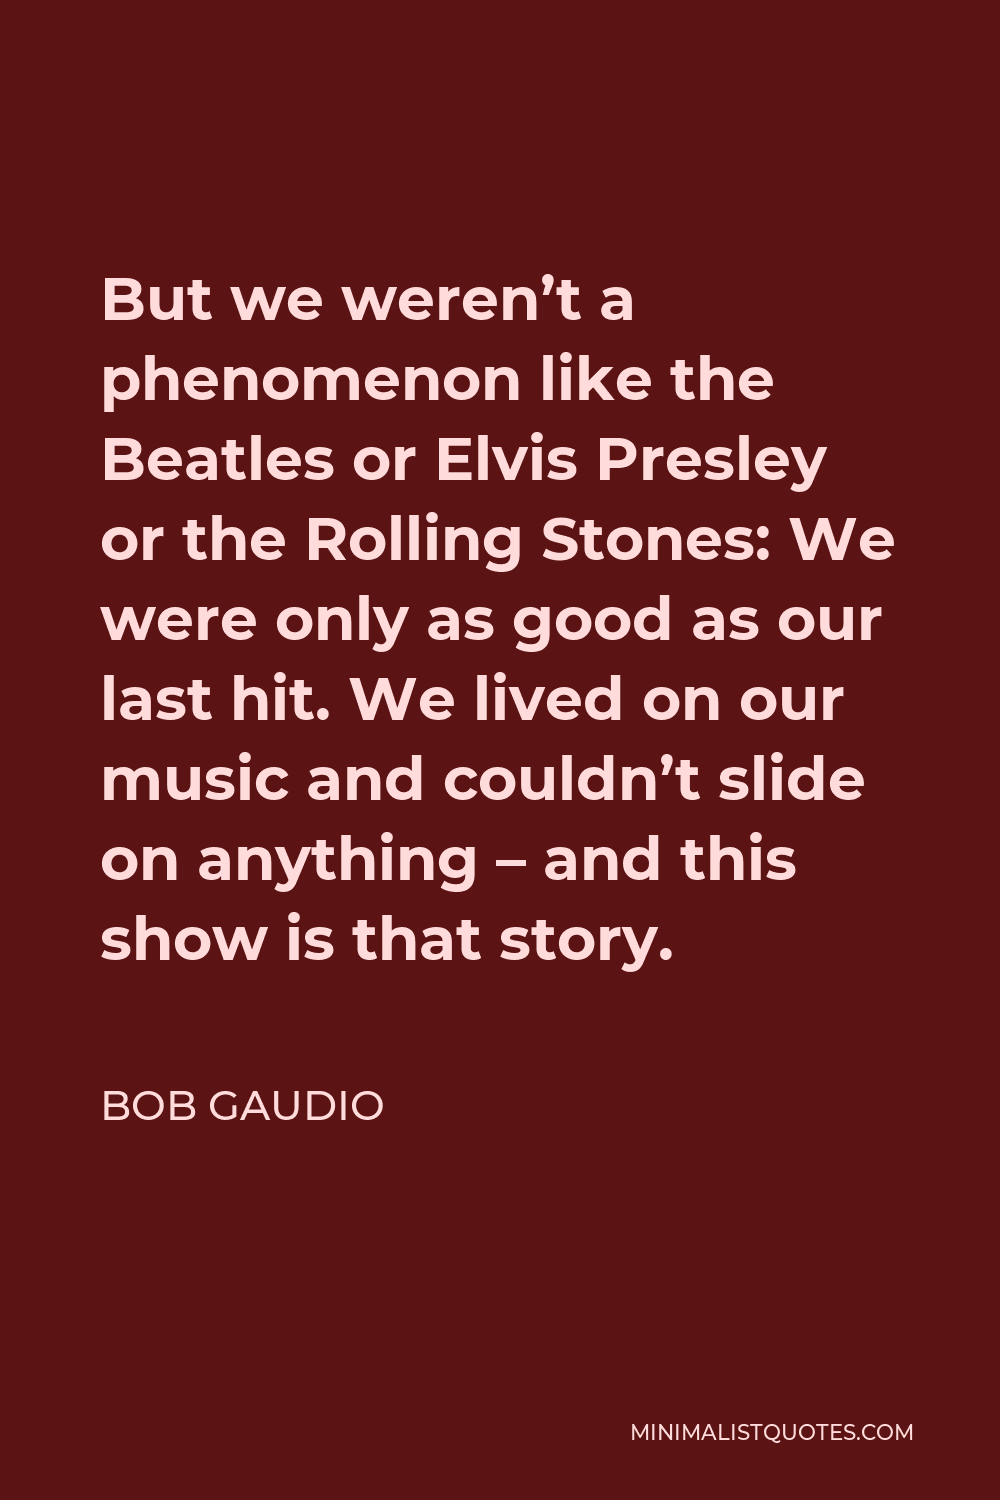 Bob Gaudio Quote - But we weren’t a phenomenon like the Beatles or Elvis Presley or the Rolling Stones: We were only as good as our last hit. We lived on our music and couldn’t slide on anything – and this show is that story.